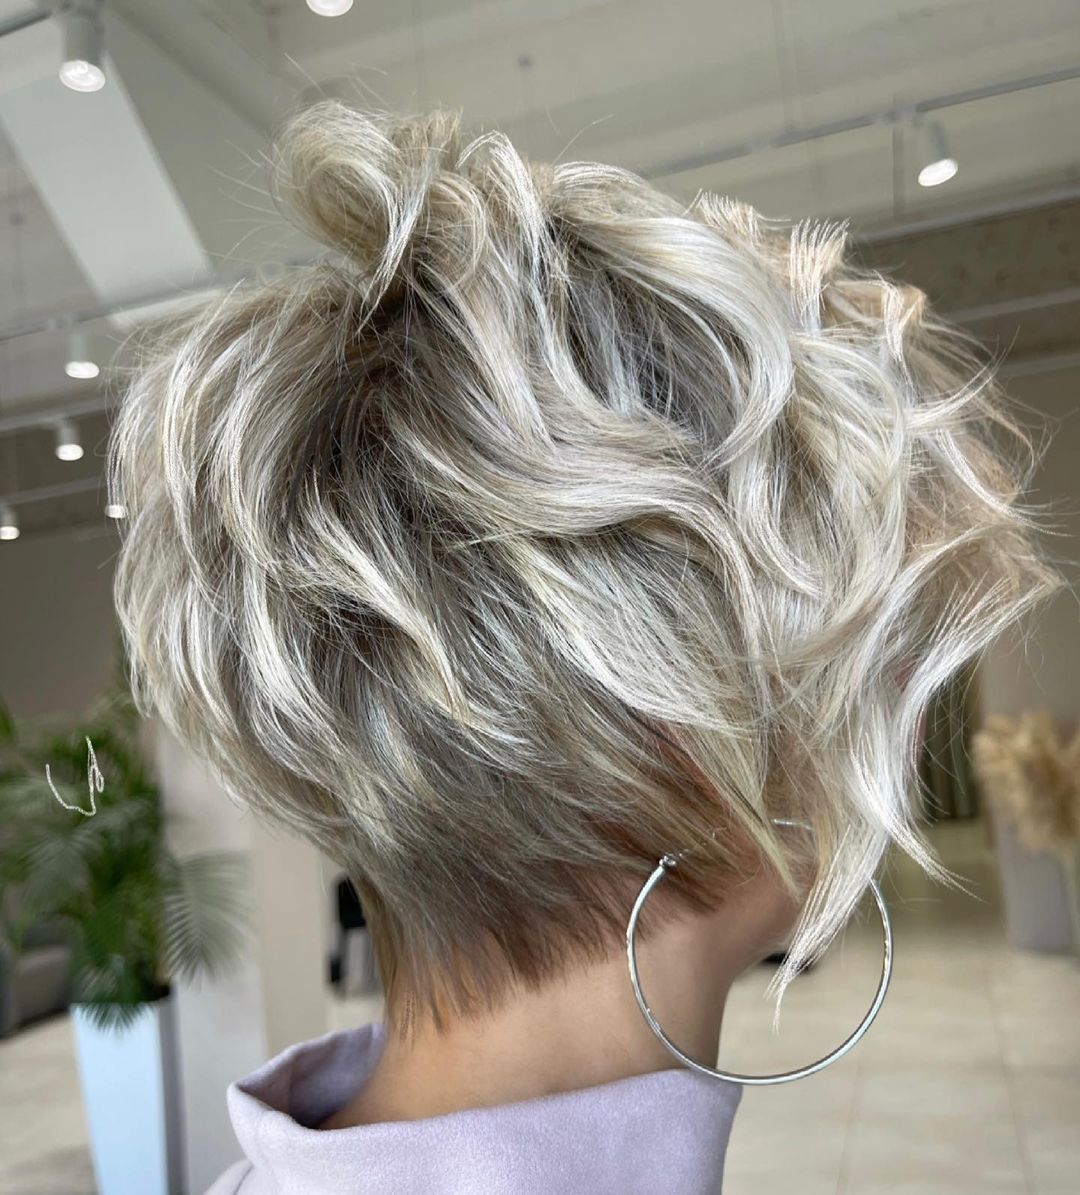 Blonde haircuts: 16 spectacular and trendy examples